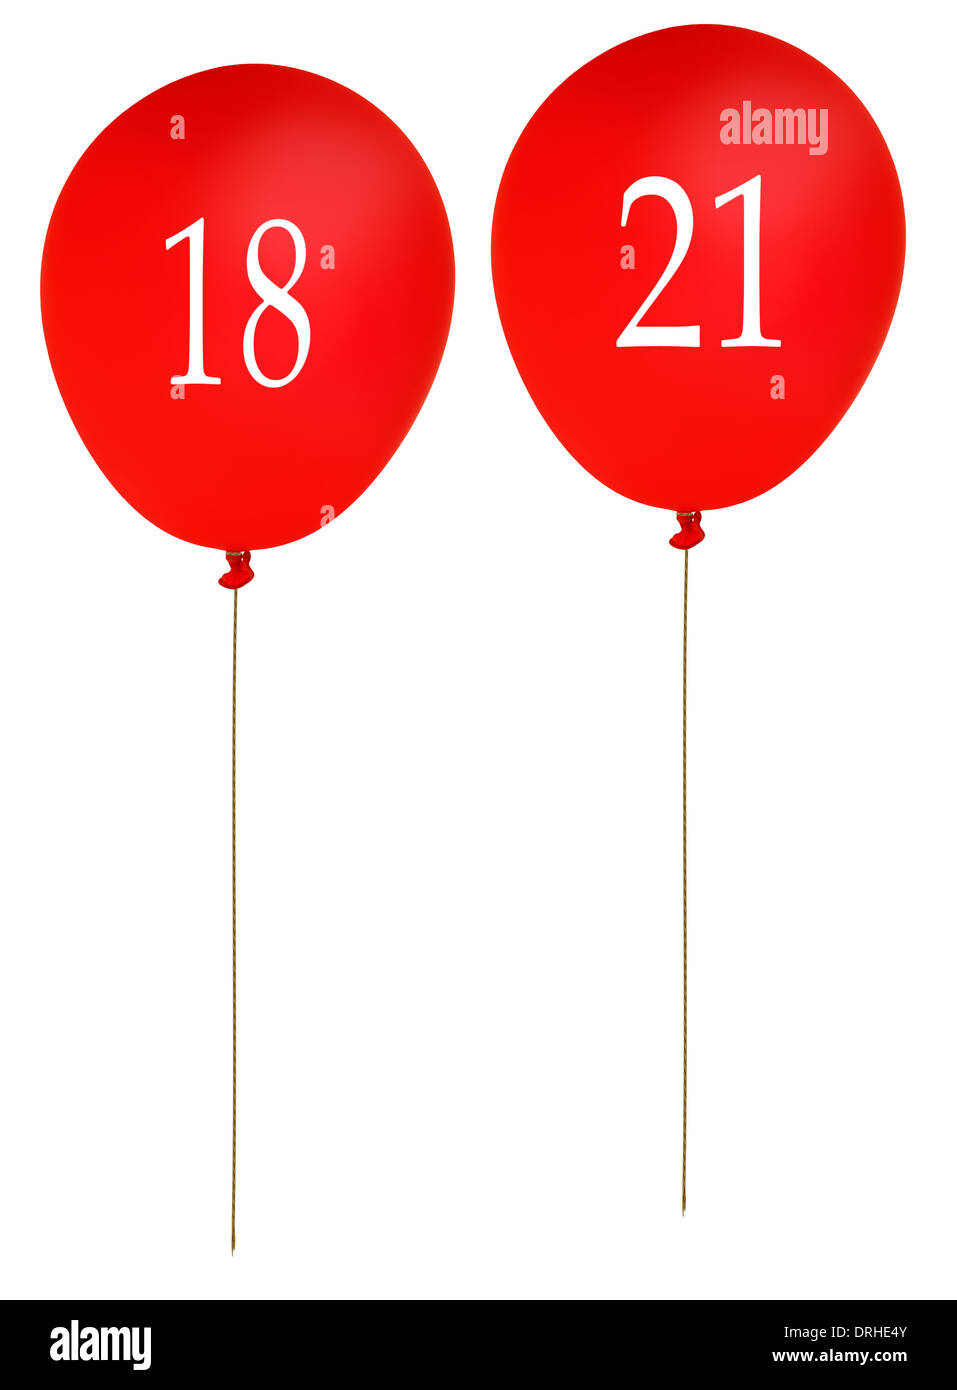 Coming of age party balloons. Stock Photo